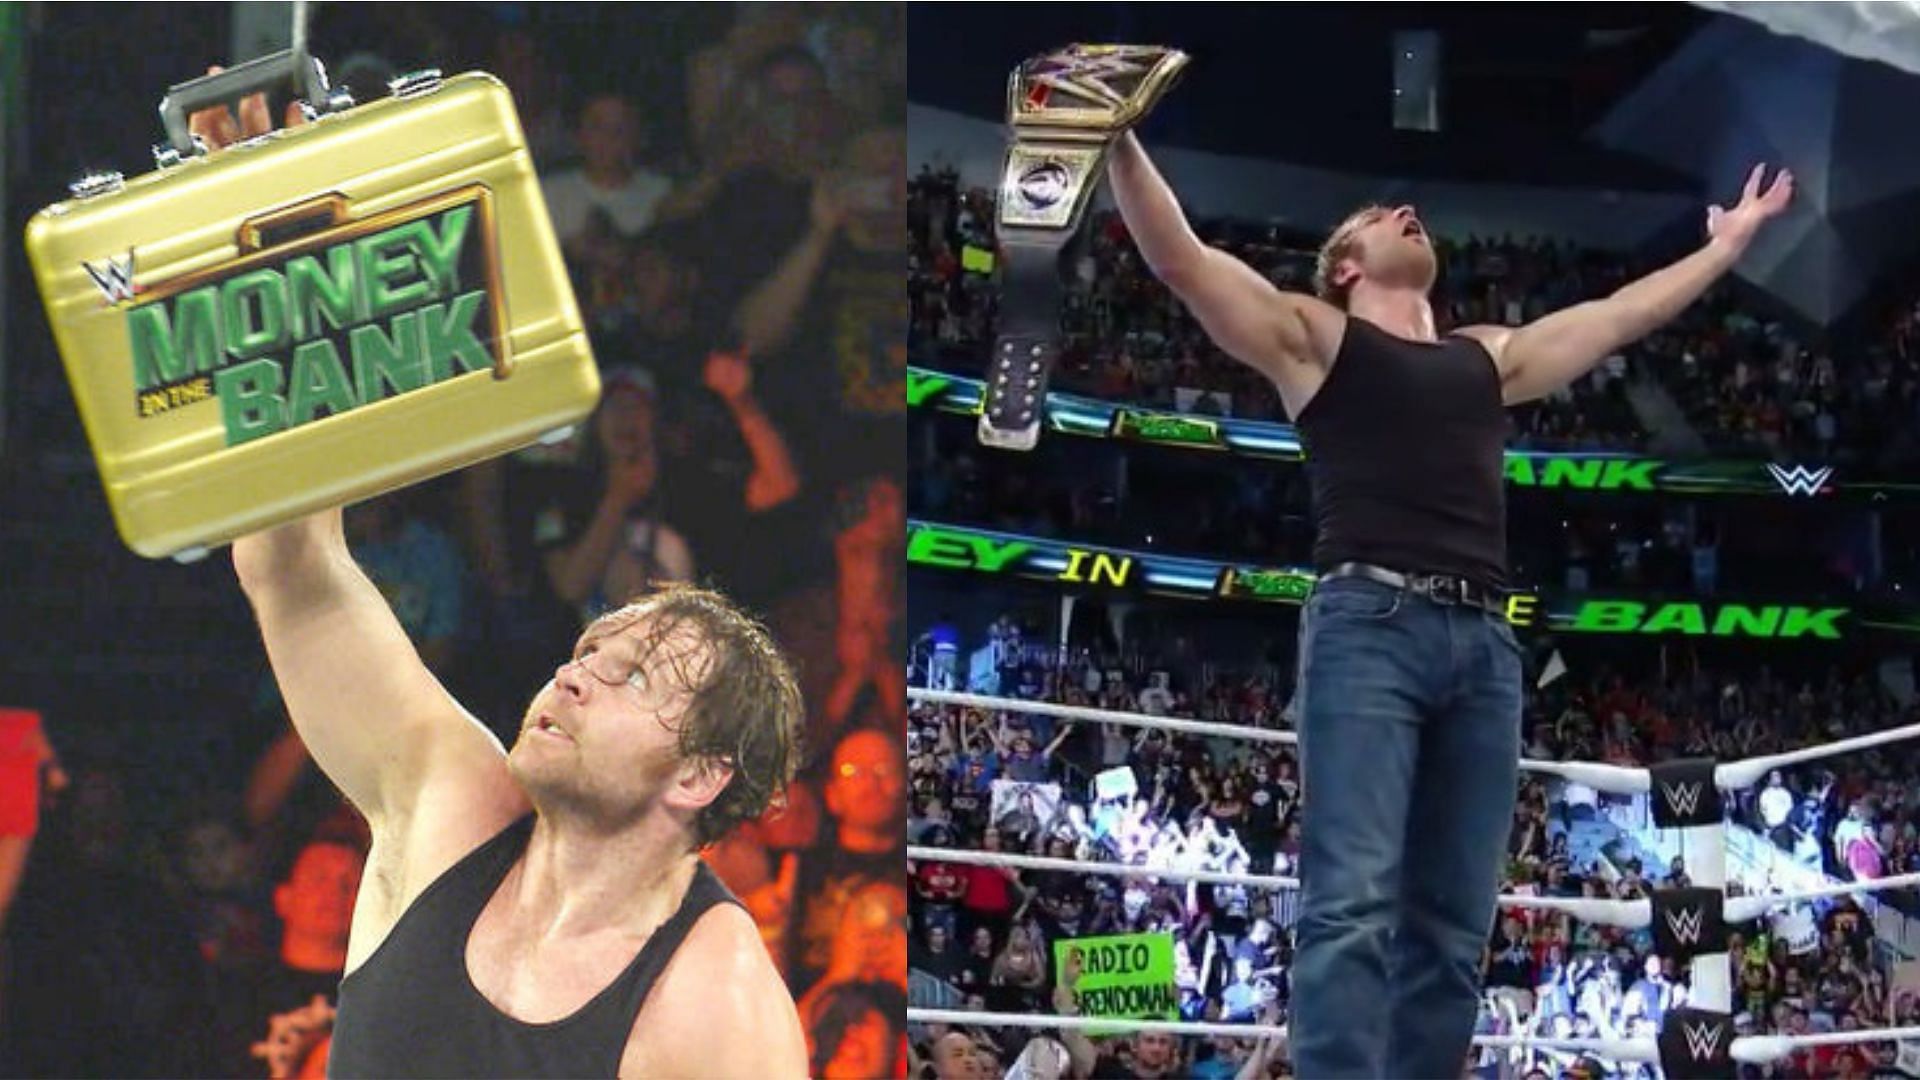 Dean Ambrose is just one of four WWE Superstars who cashed in the Money in the Bank briefcase at the event